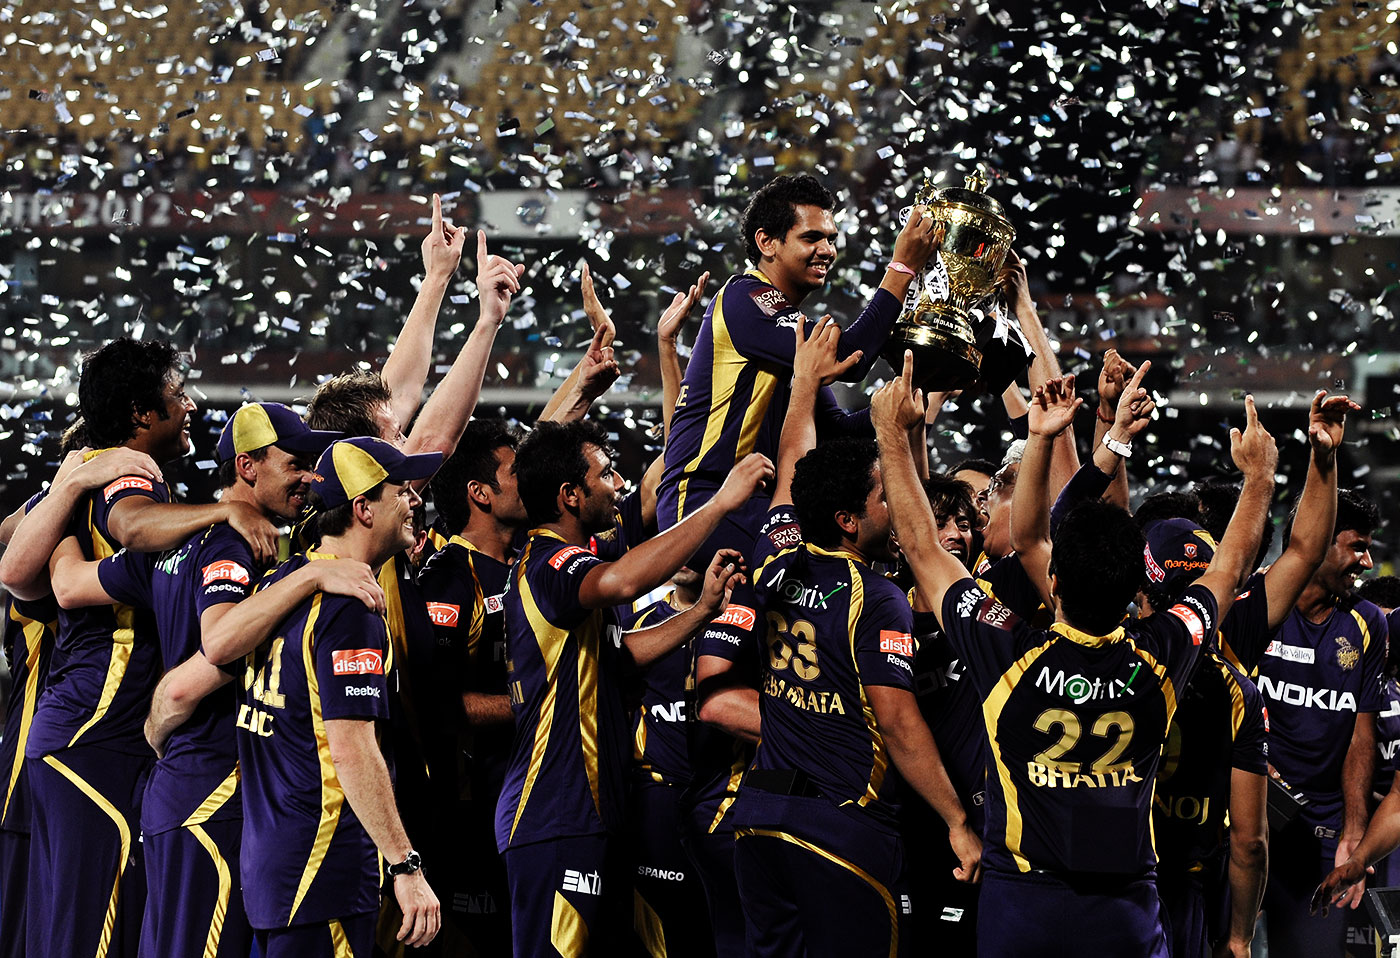 How Kolkata turned it around with continuity